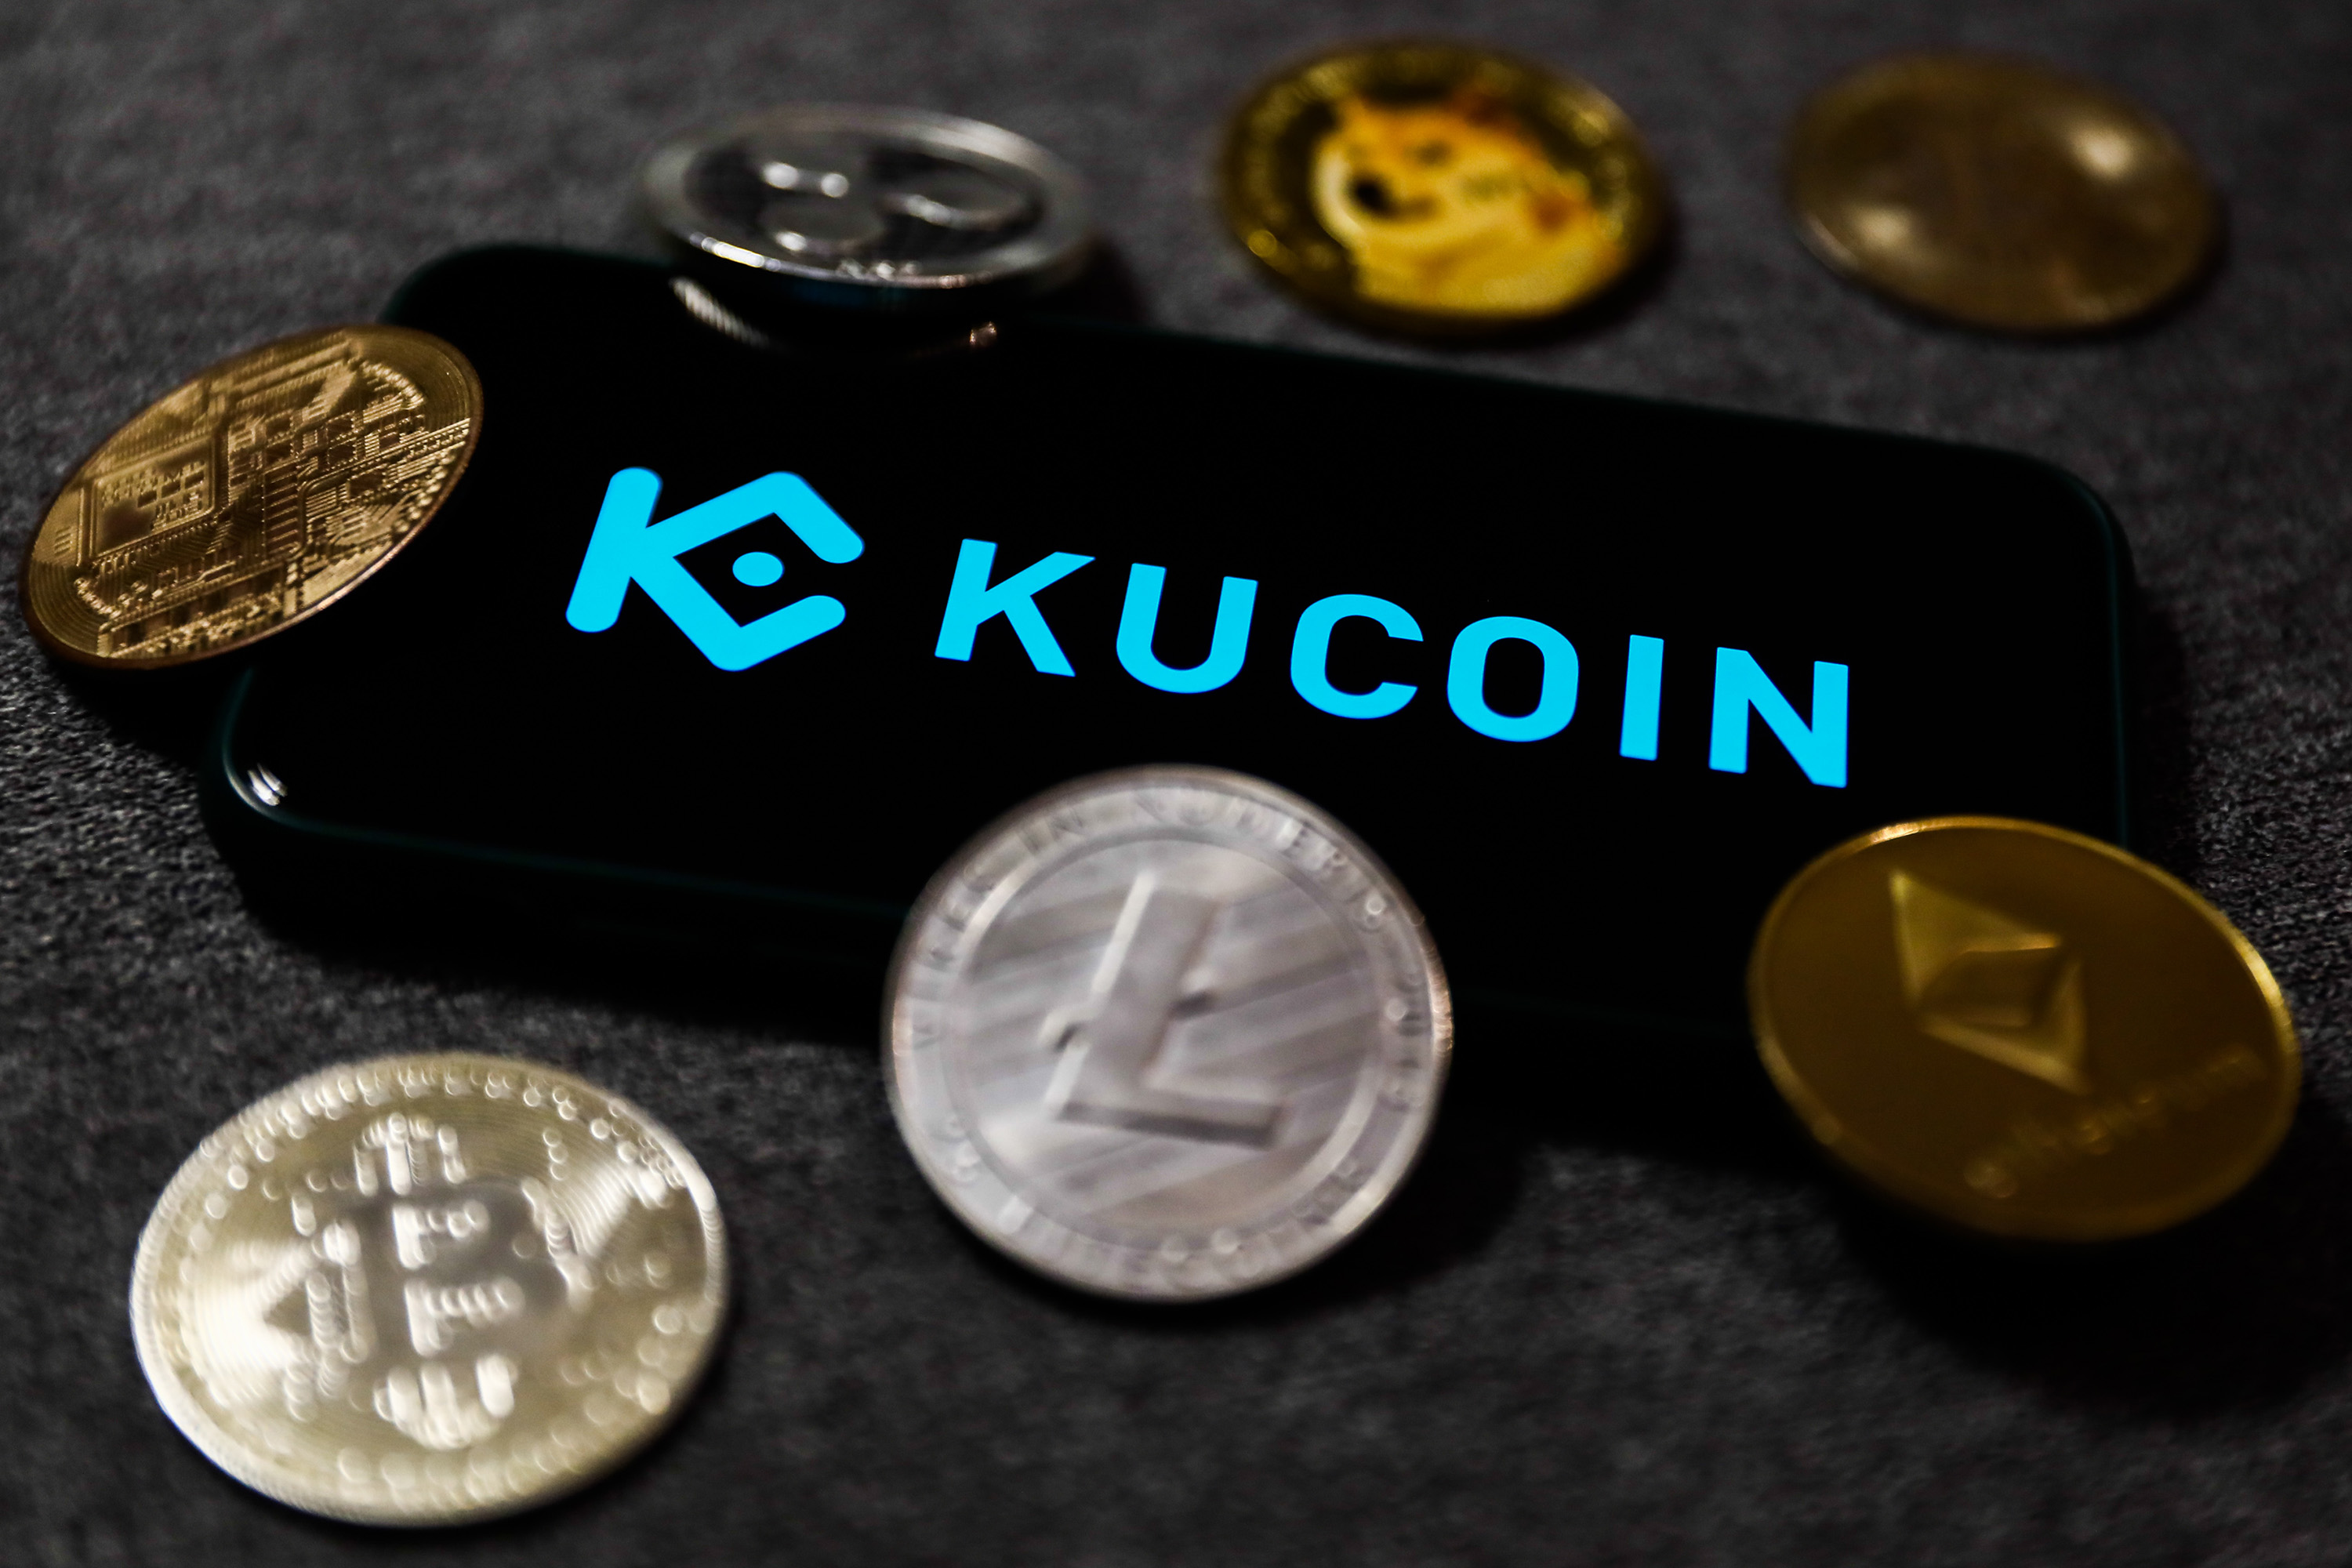 KuCoin Tells Users in China to Move Funds to ‘Other Platforms’ by Dec. 31